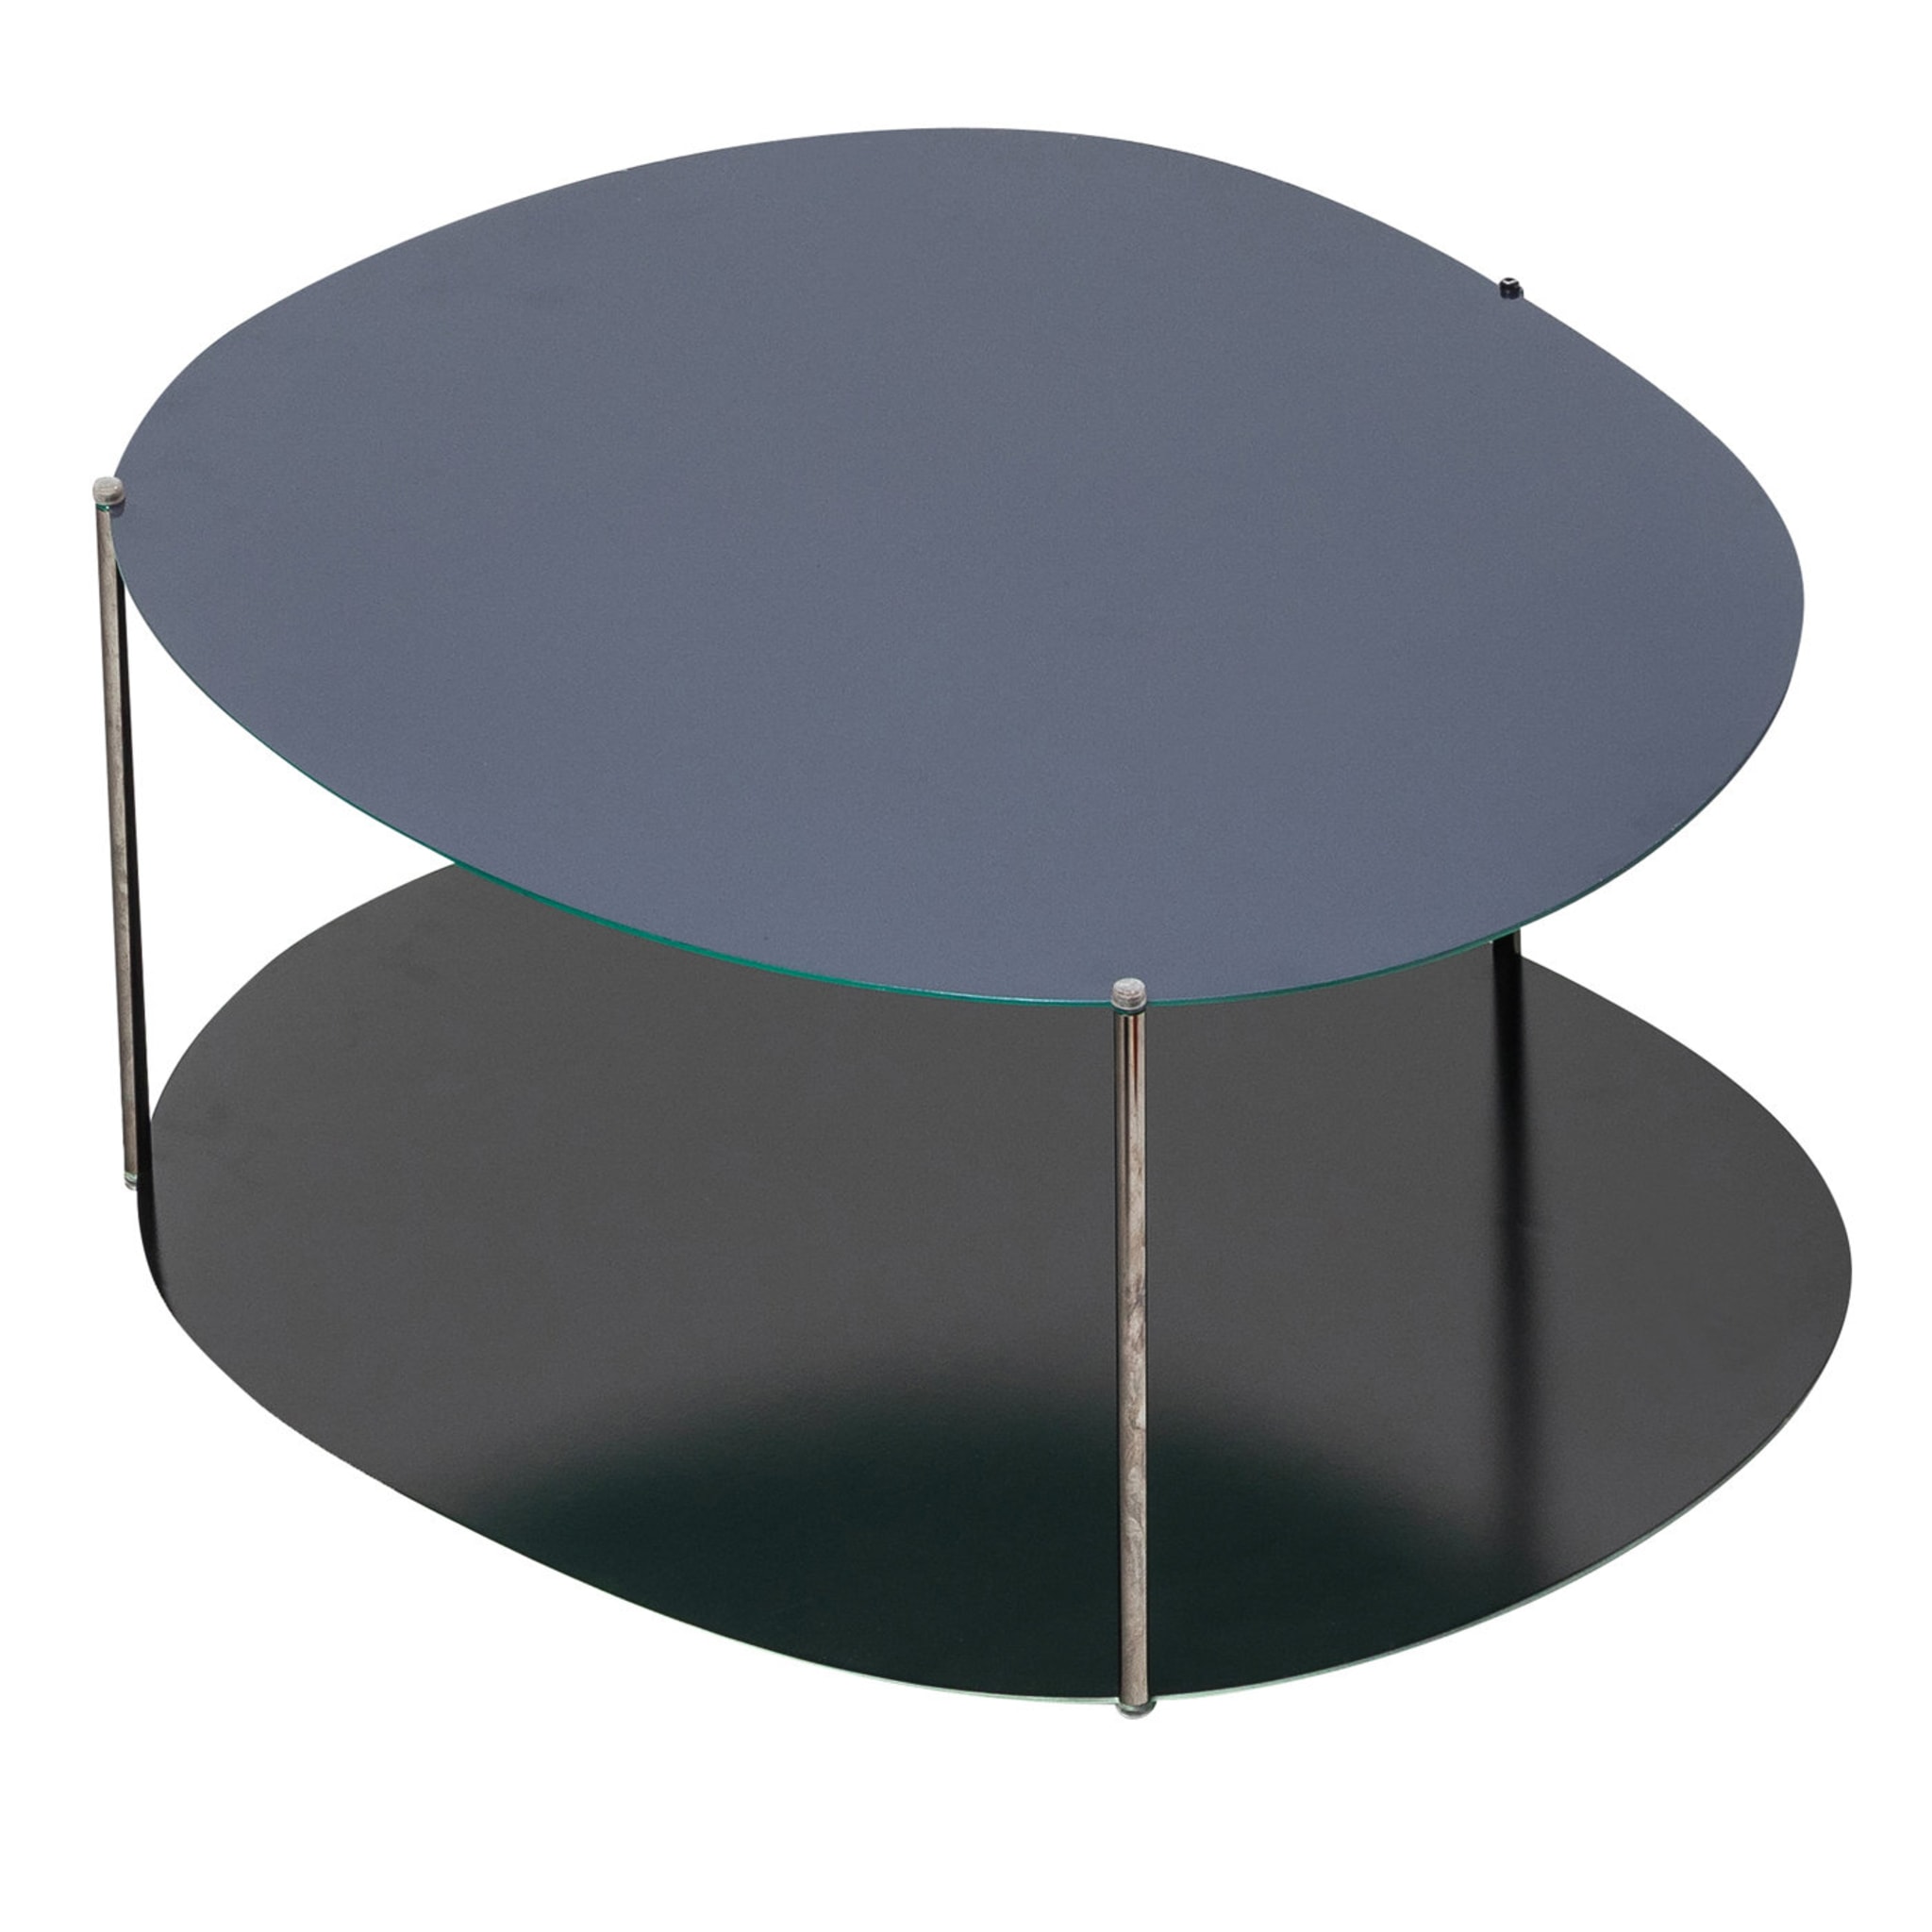 Picos Blue/Black Large Coffee Table by Claesson Koivisto Rune - Main view